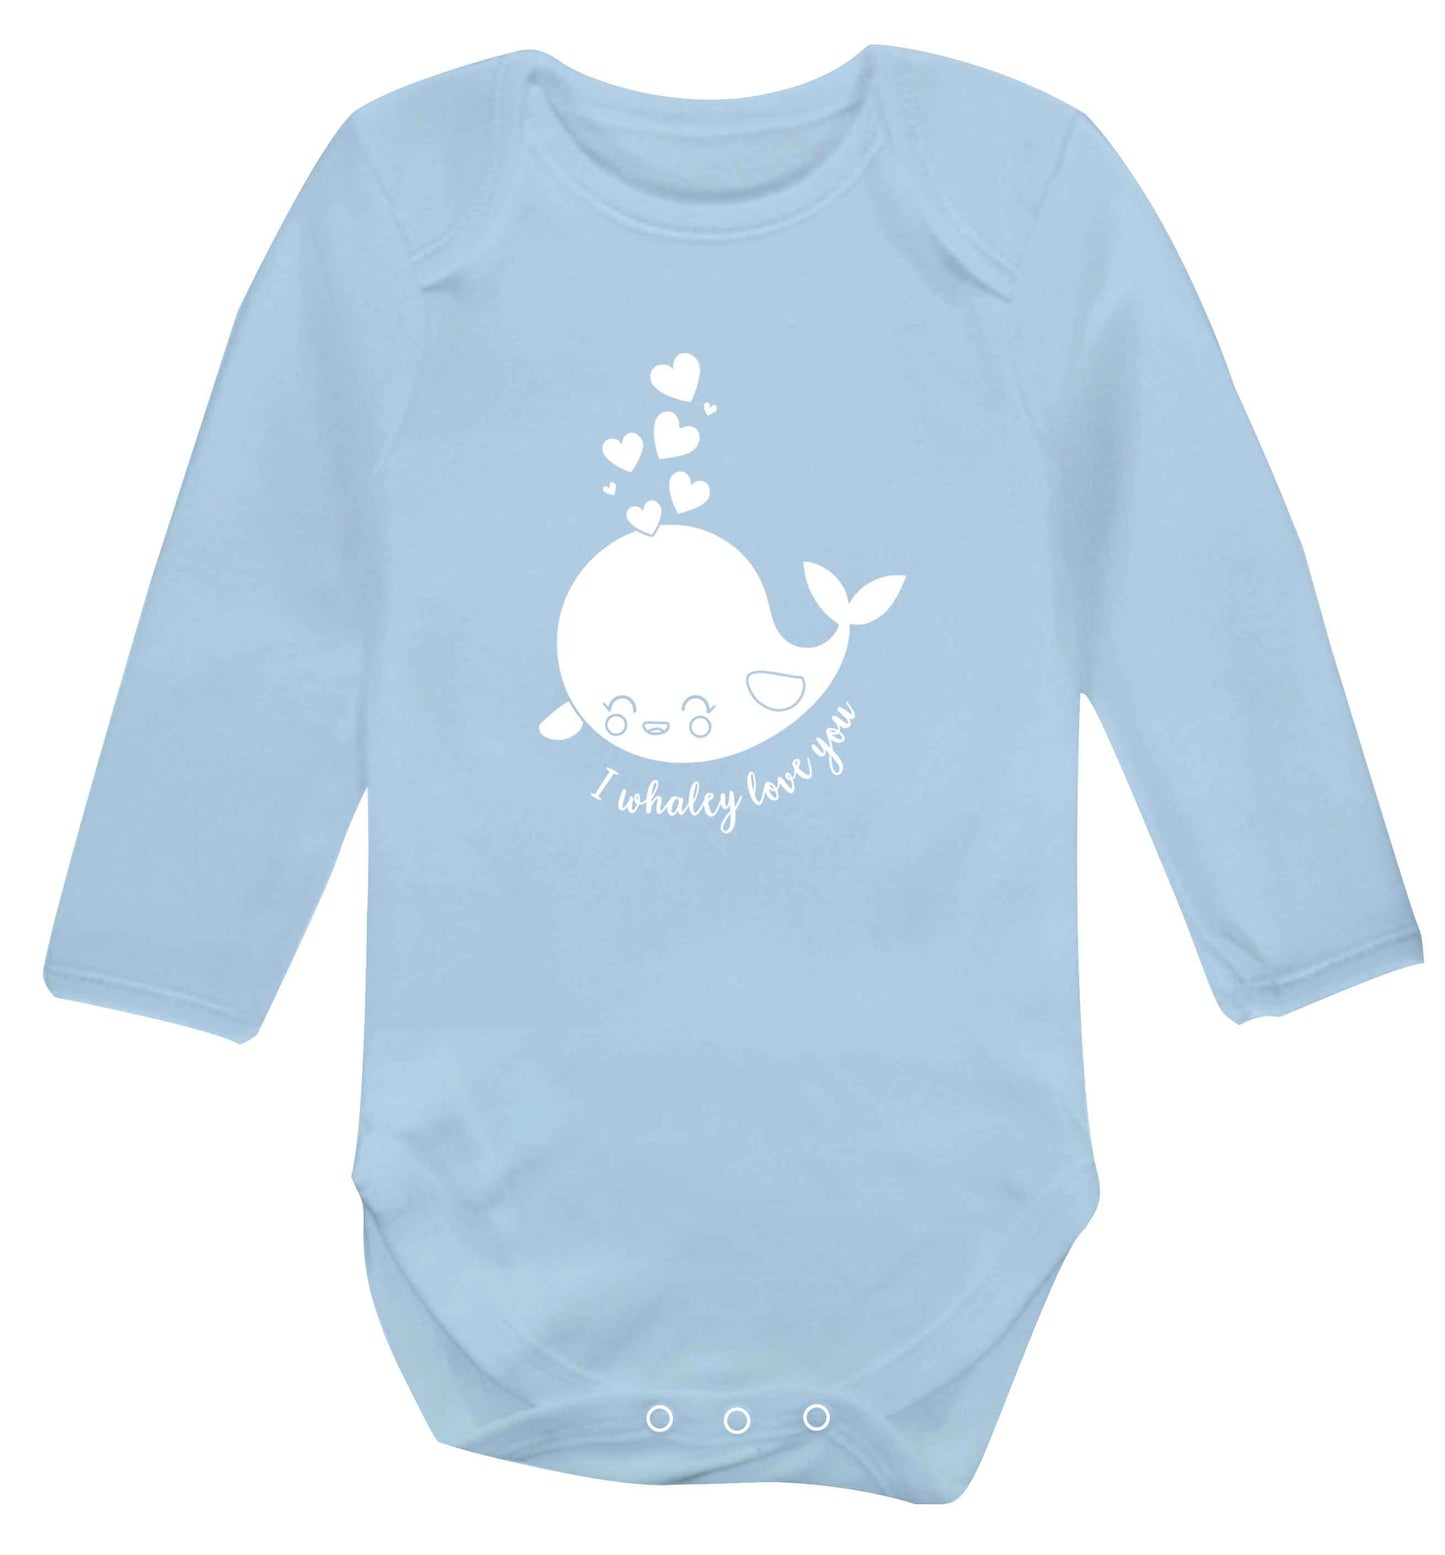 I whaley love you baby vest long sleeved pale blue 6-12 months